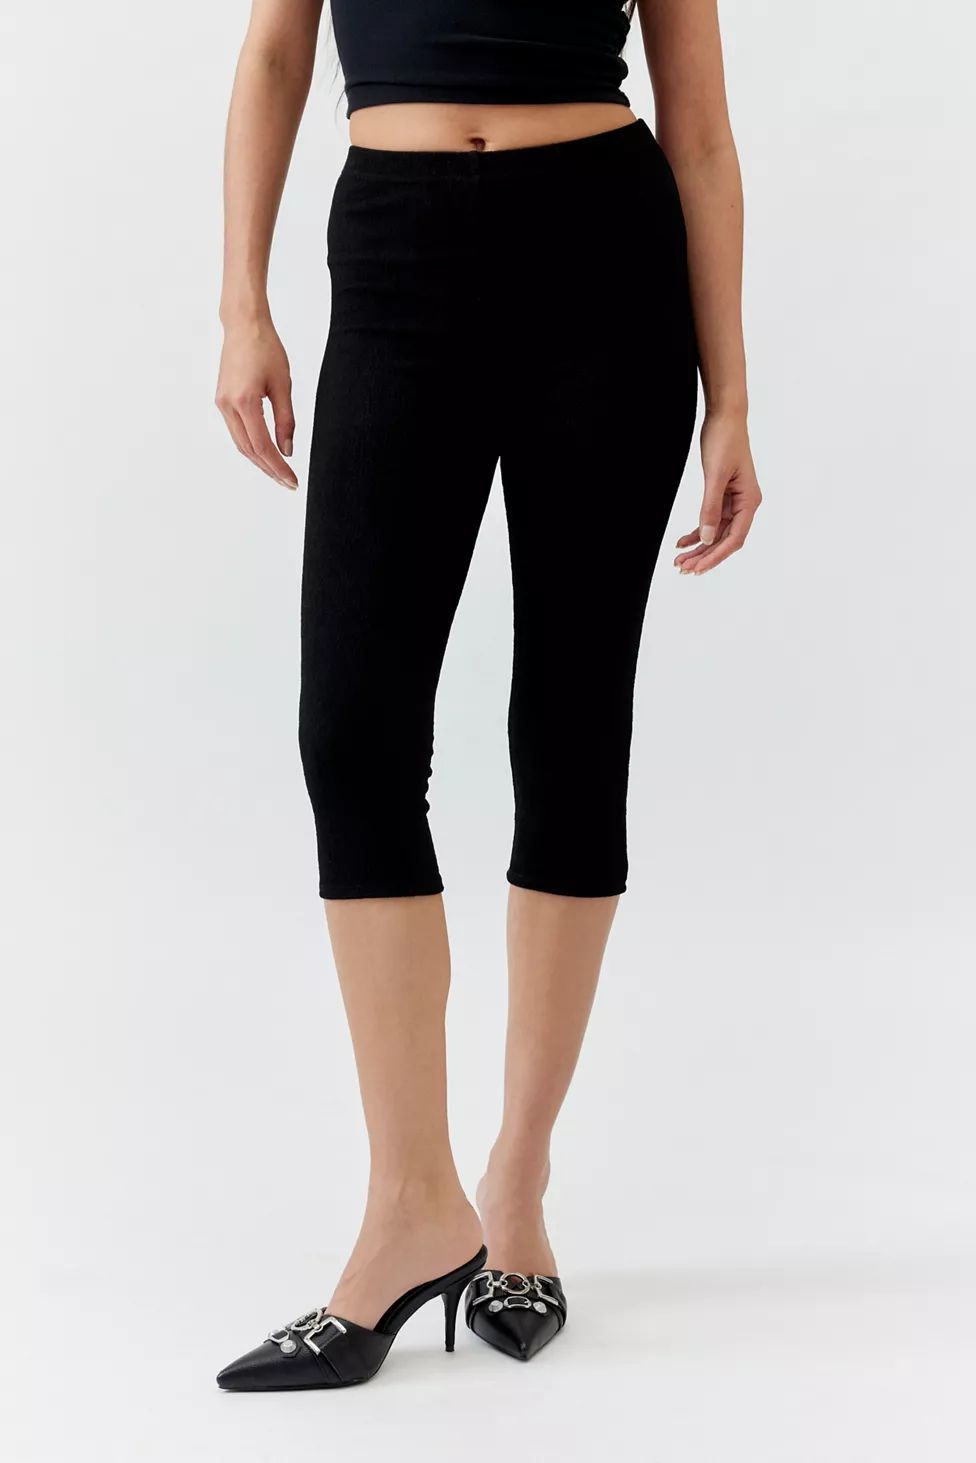 Urban Renewal Remnants Cropped Capri Legging | Urban Outfitters (US and RoW)